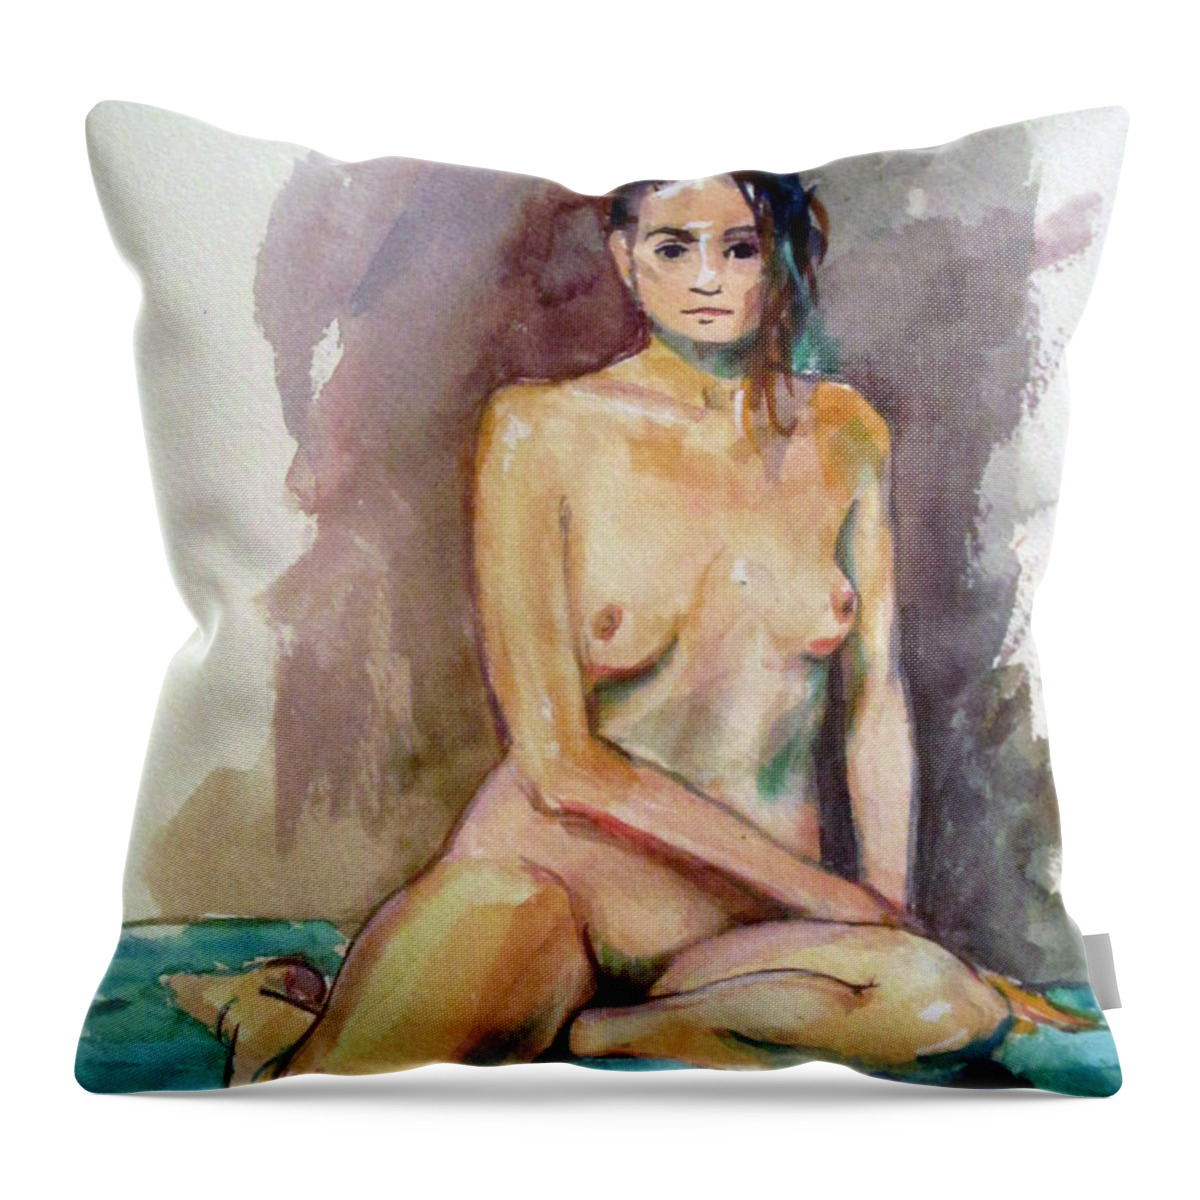 Nudes Throw Pillow featuring the painting Seated Nude Straight On by Mark Lunde